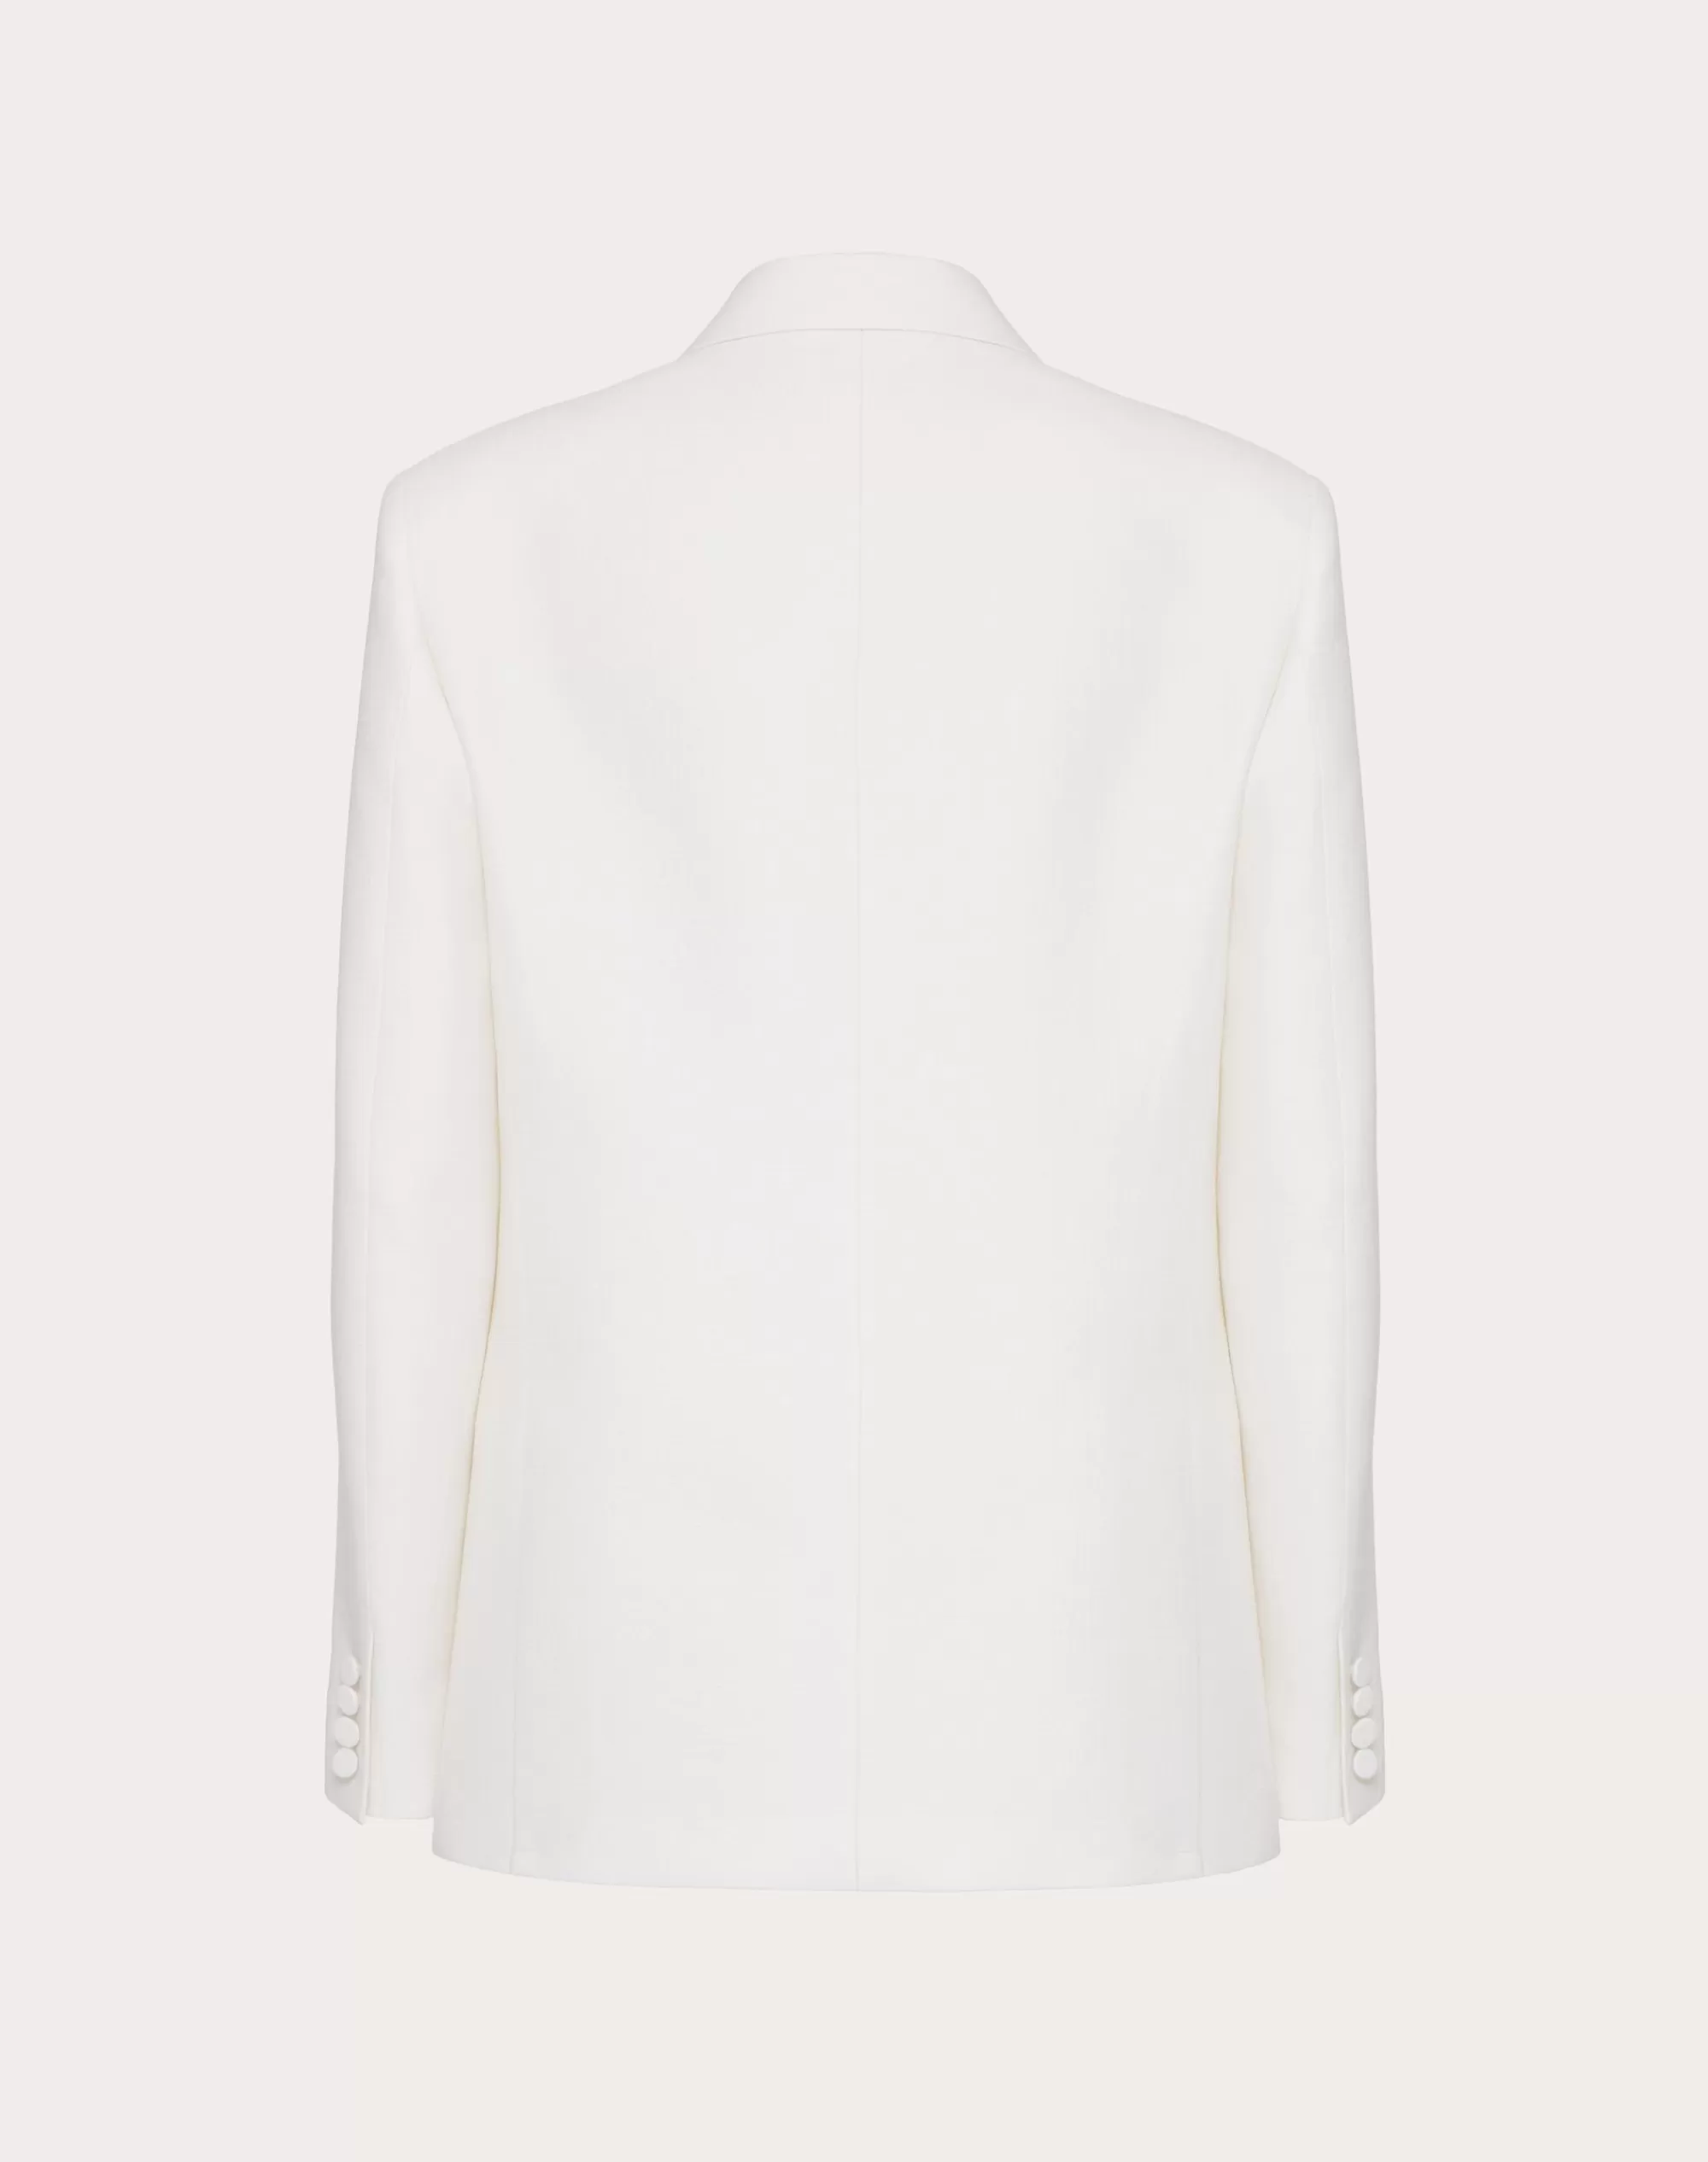 Valentino DOUBLE-BREASTED WOOL AND SILK JACKET WITH FLOWER EMBROIDERY Ivory Discount